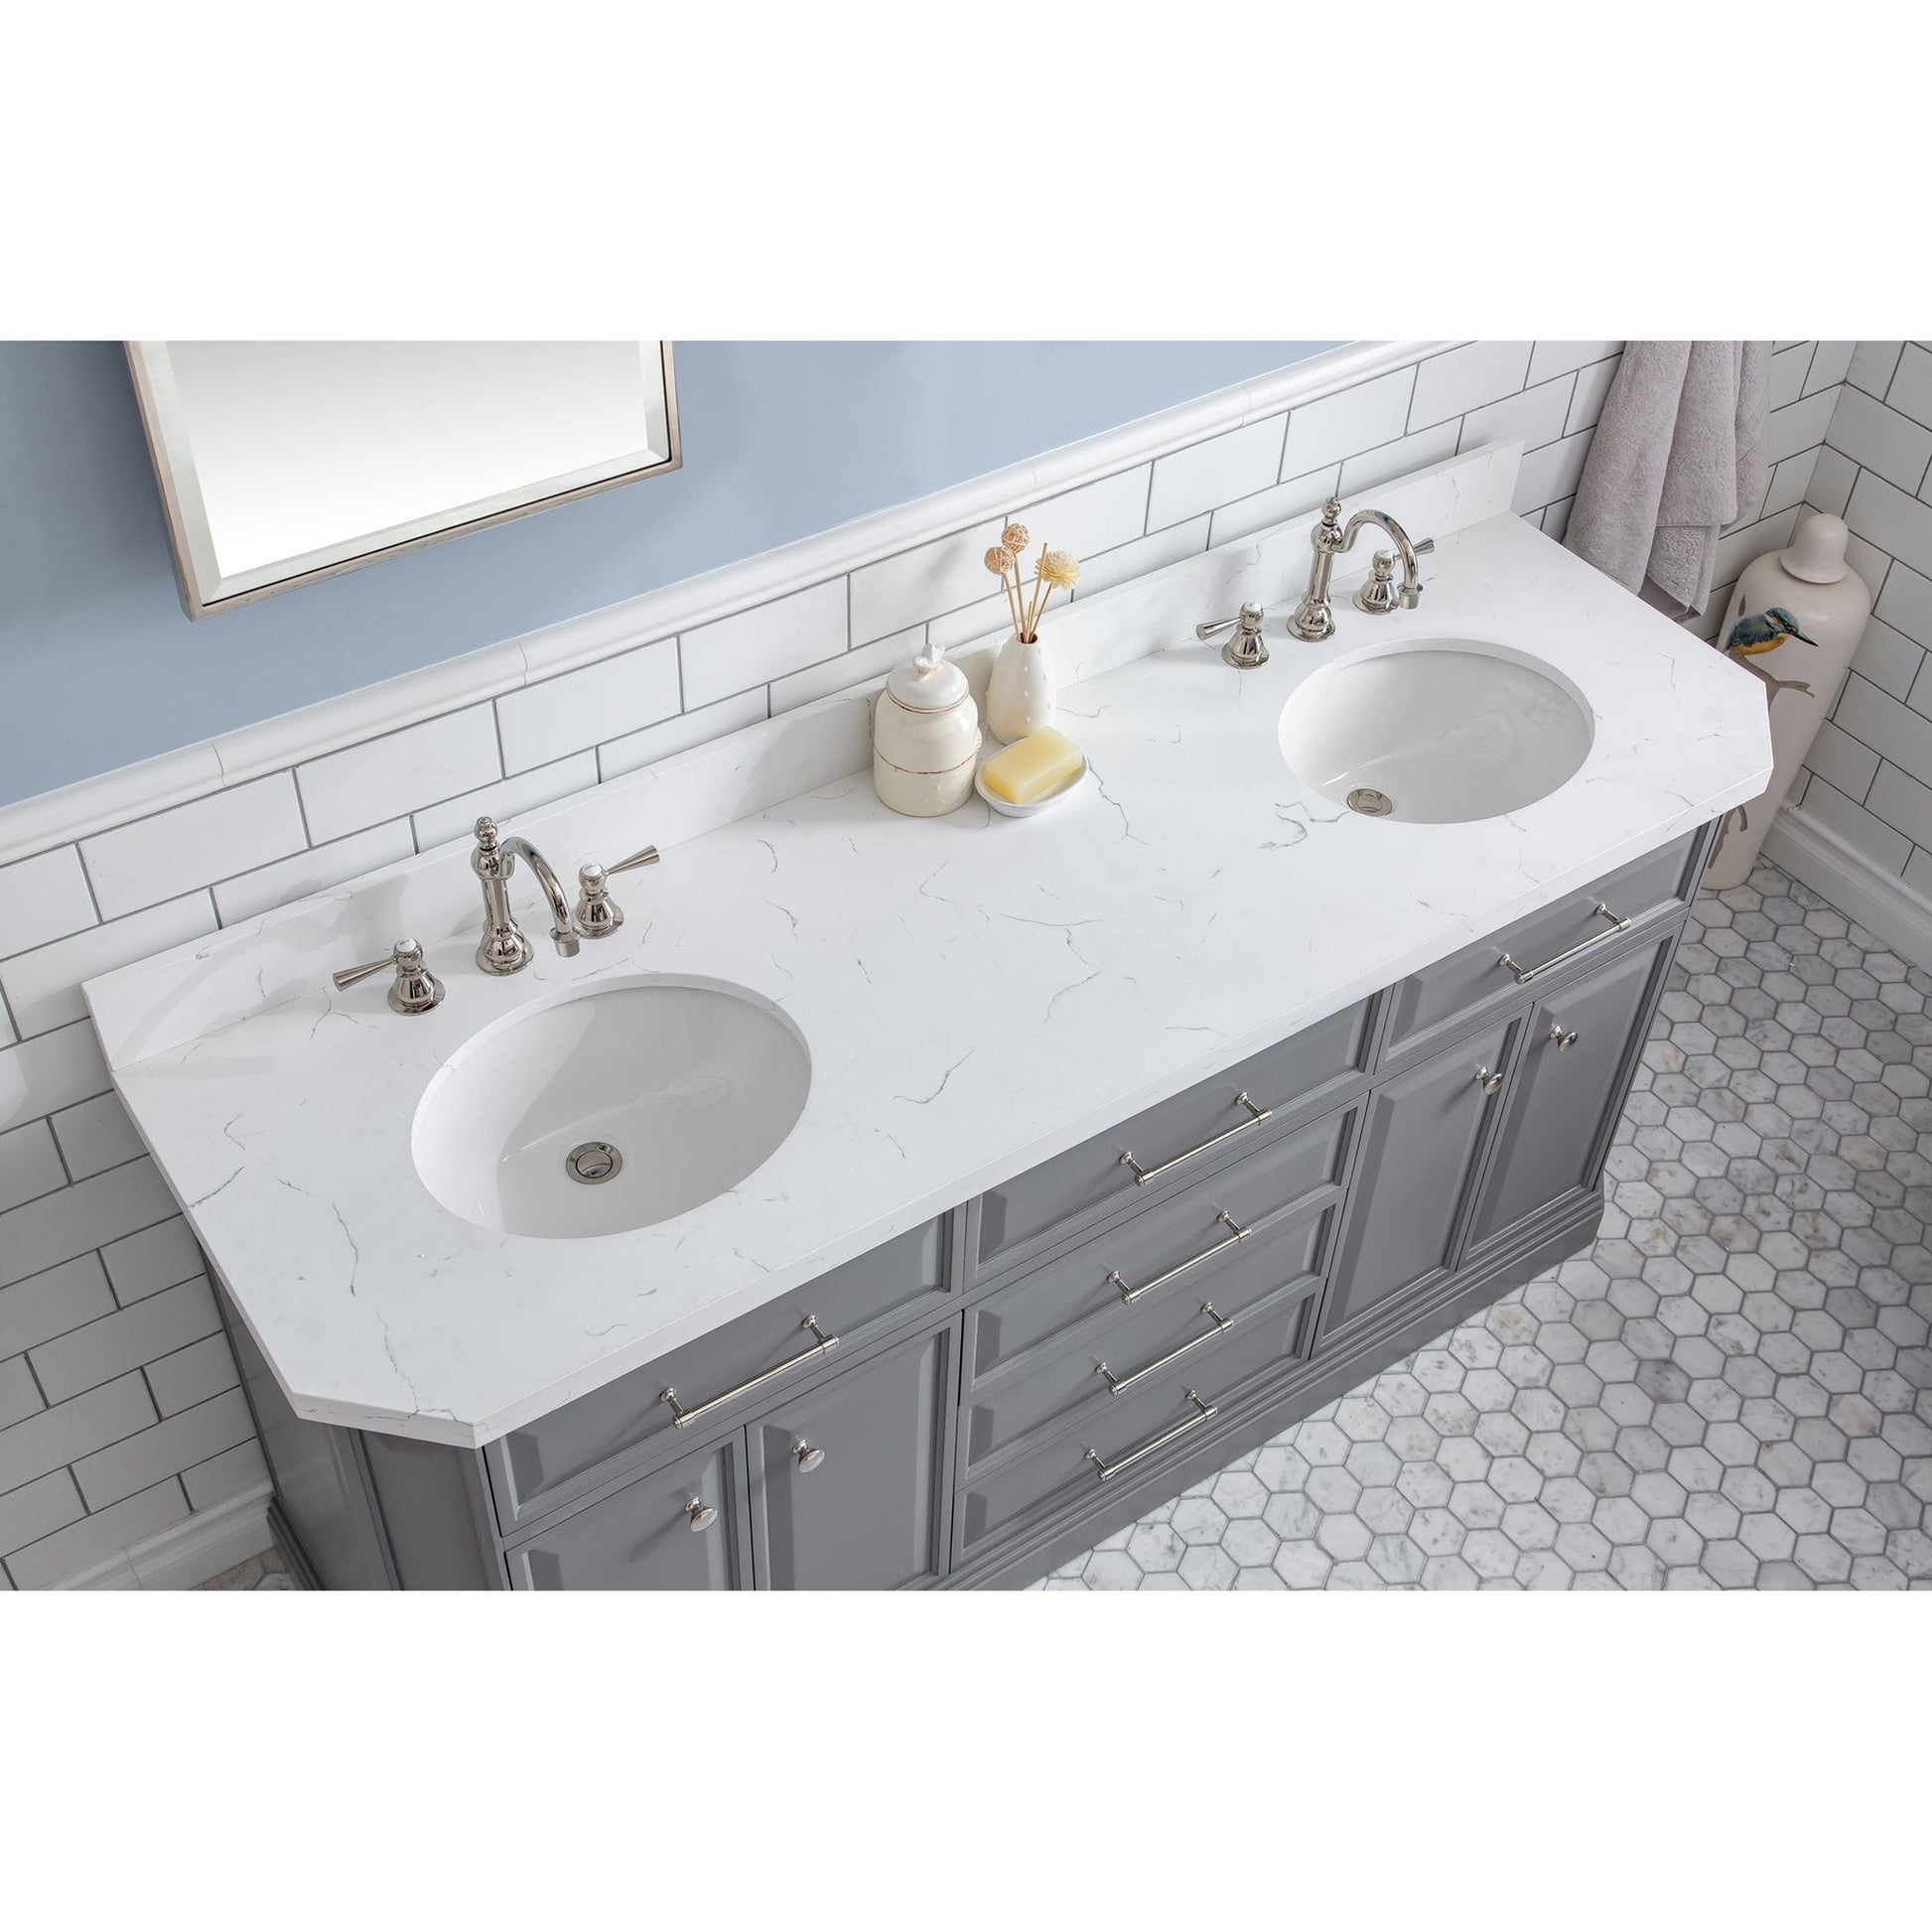 Water Creation Palace 72" Quartz Carrara Cashmere Grey Bathroom Vanity Set With Hardware And F2-0012 Faucets, Mirror in Polished Nickel (PVD) Finish